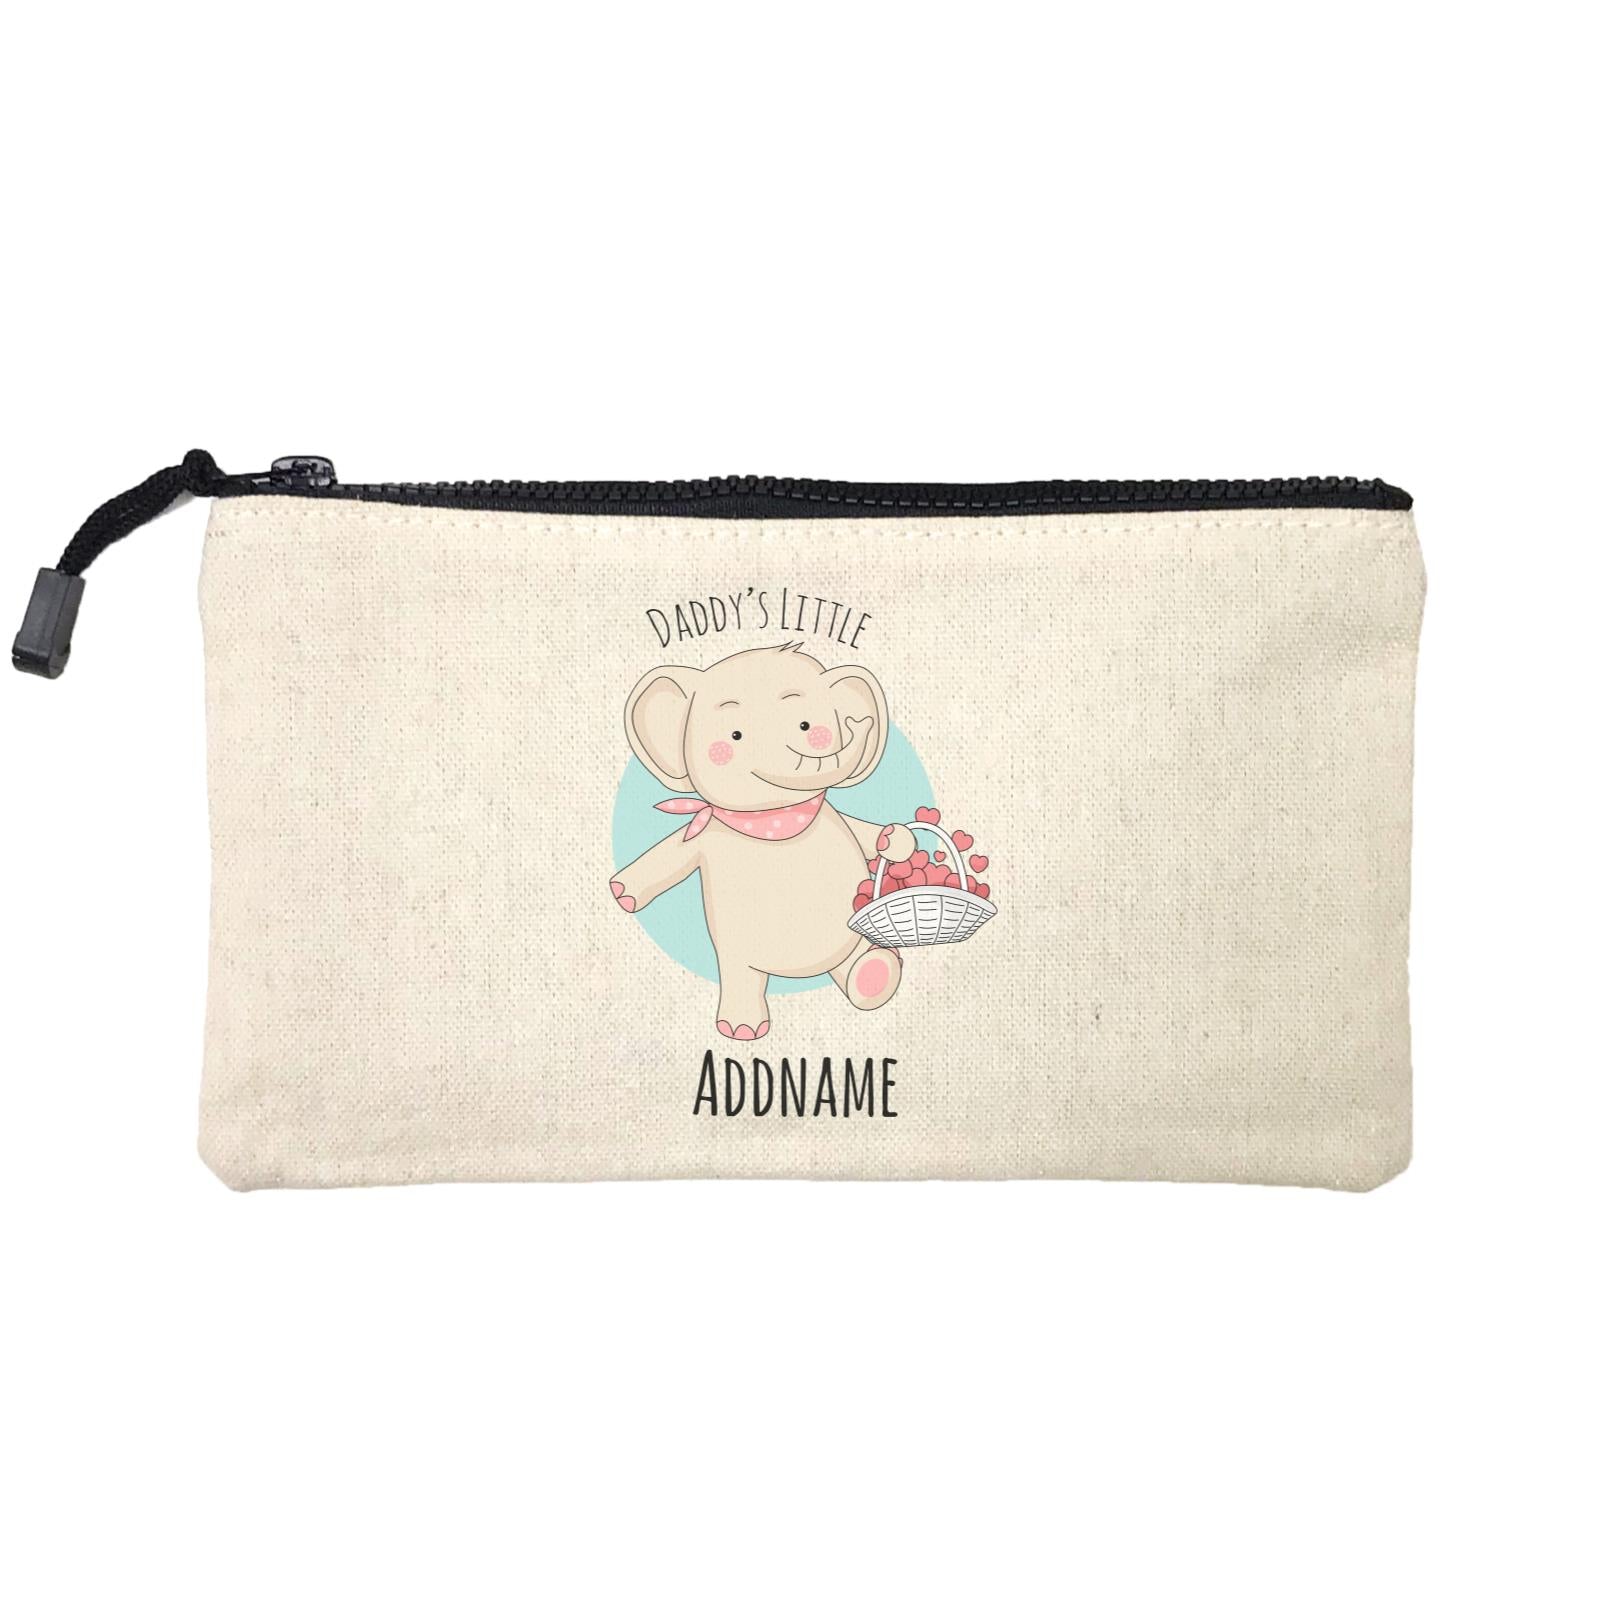 Sweet Animals Sketches Elephant Daddy's Little Addname Mini Accessories Stationery Pouch